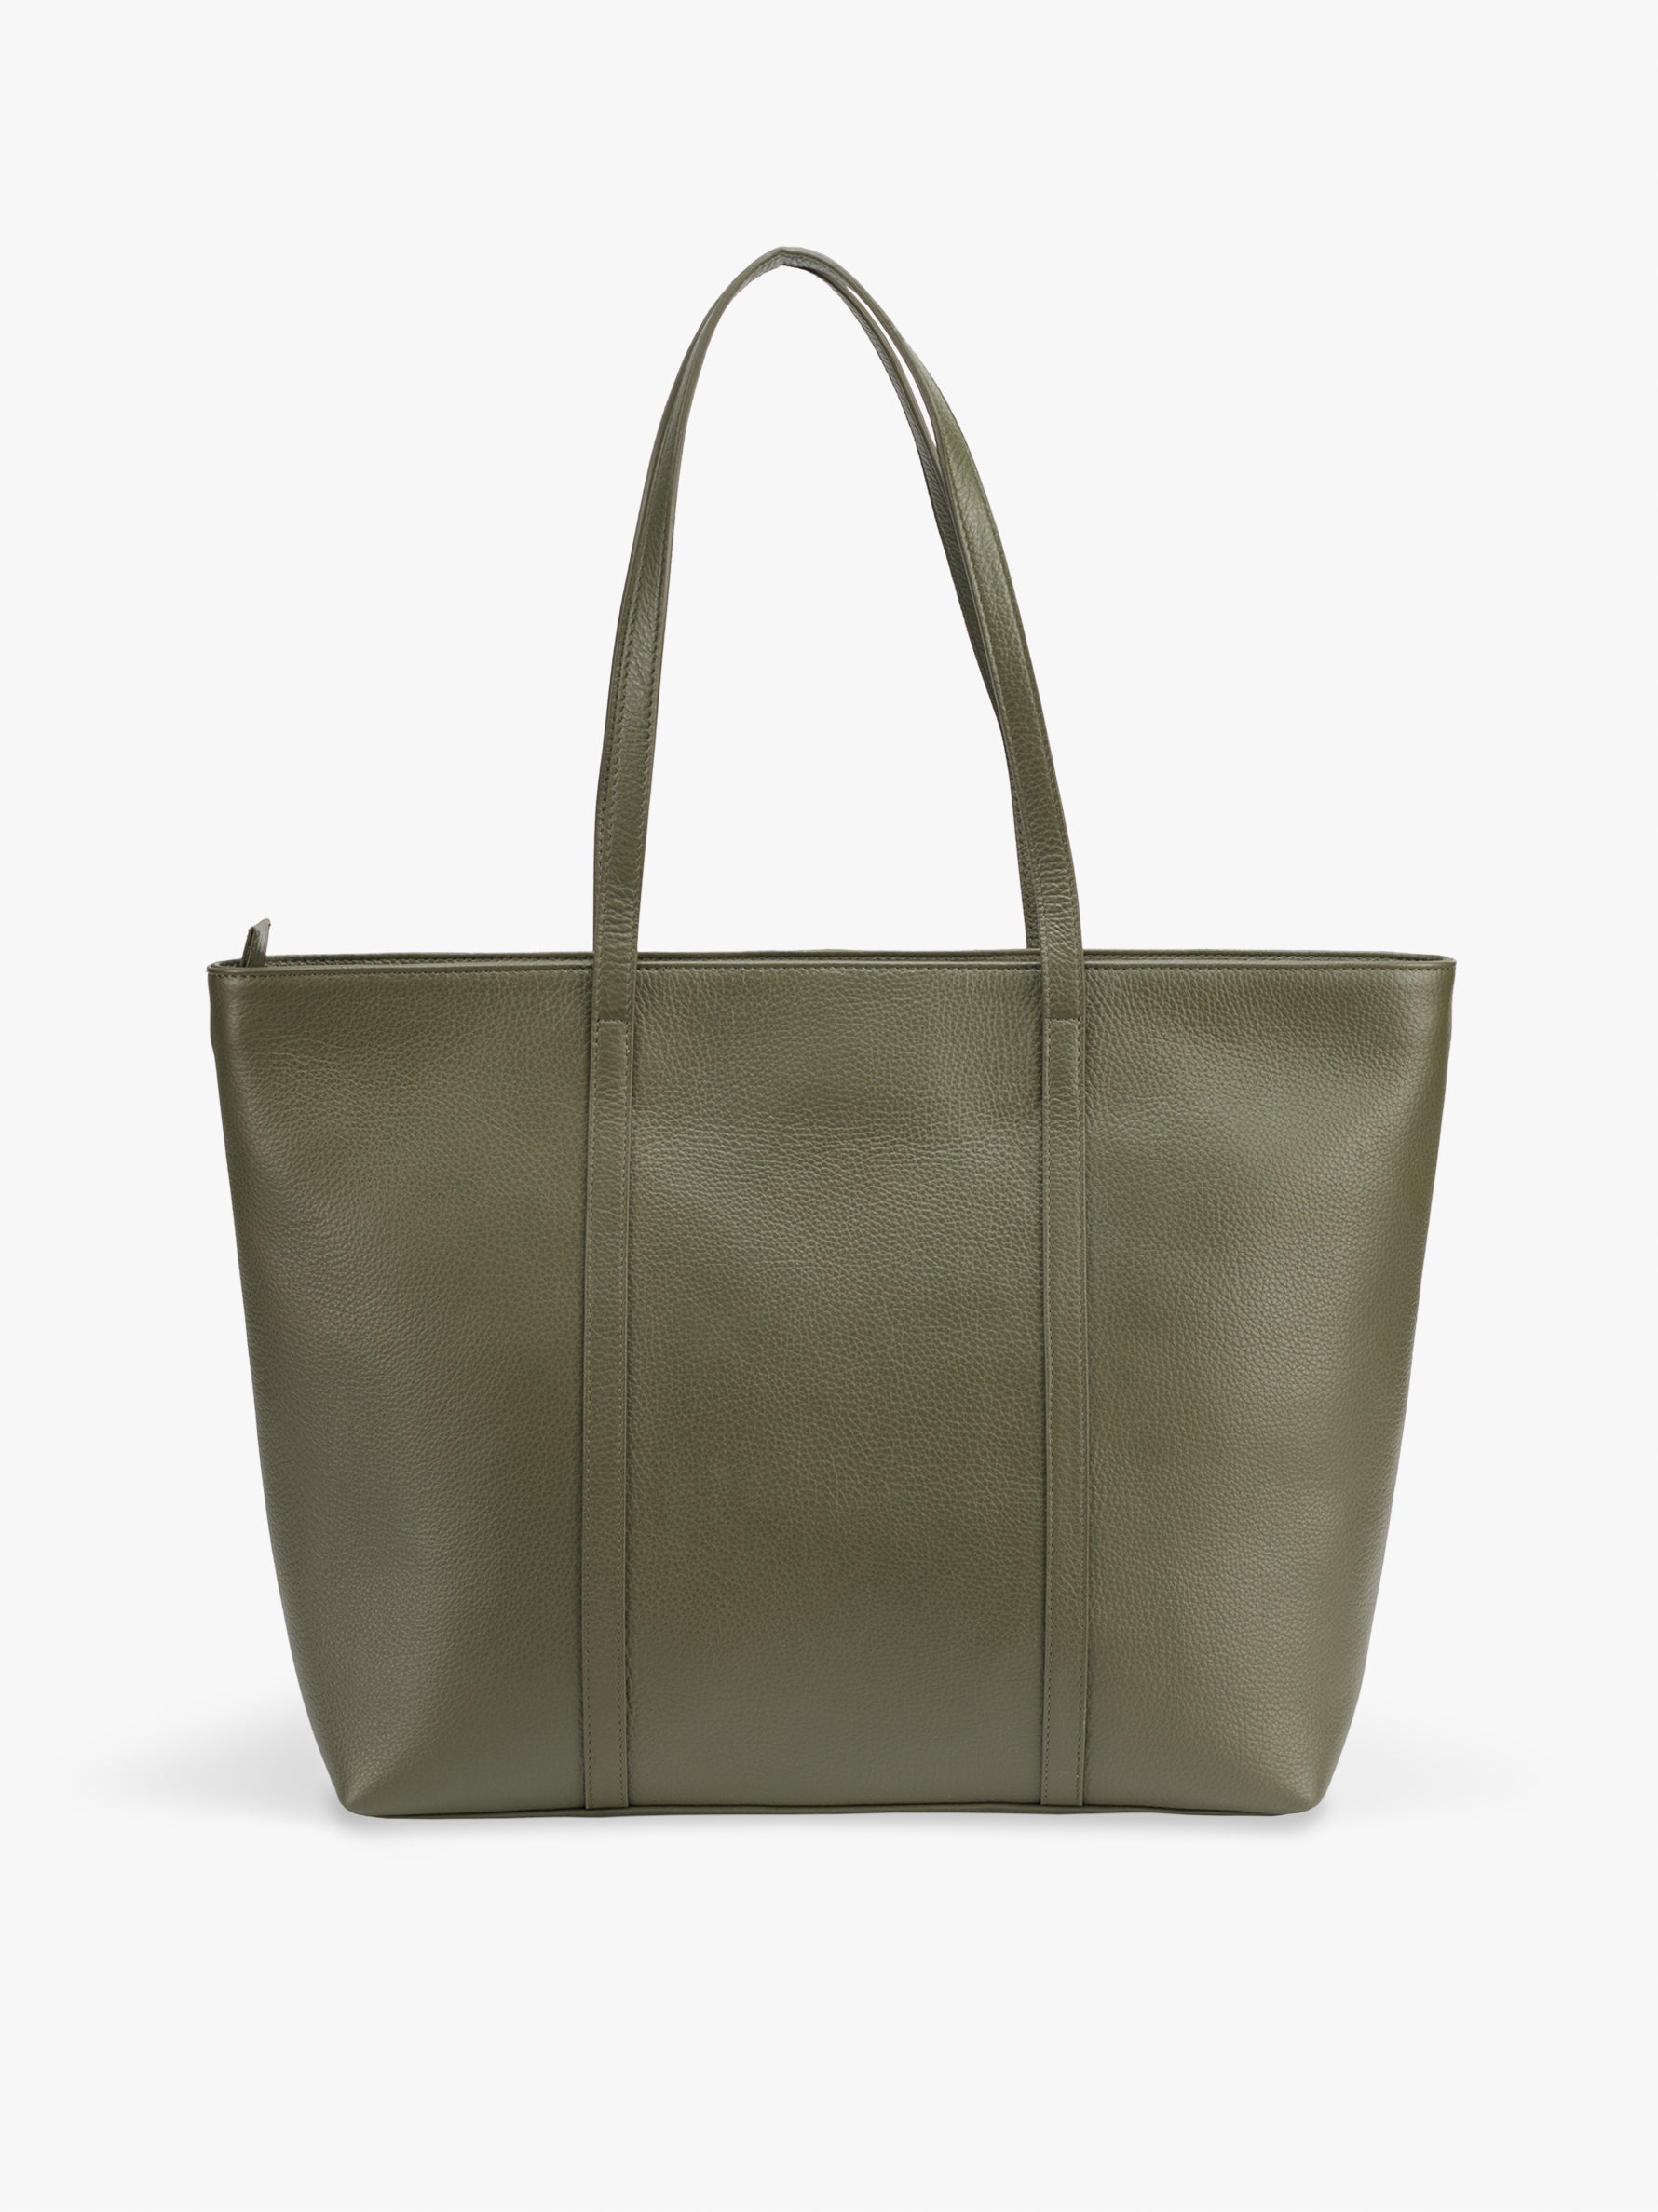 Handcrafted genuine leather 365 days tote bag for women Olive green